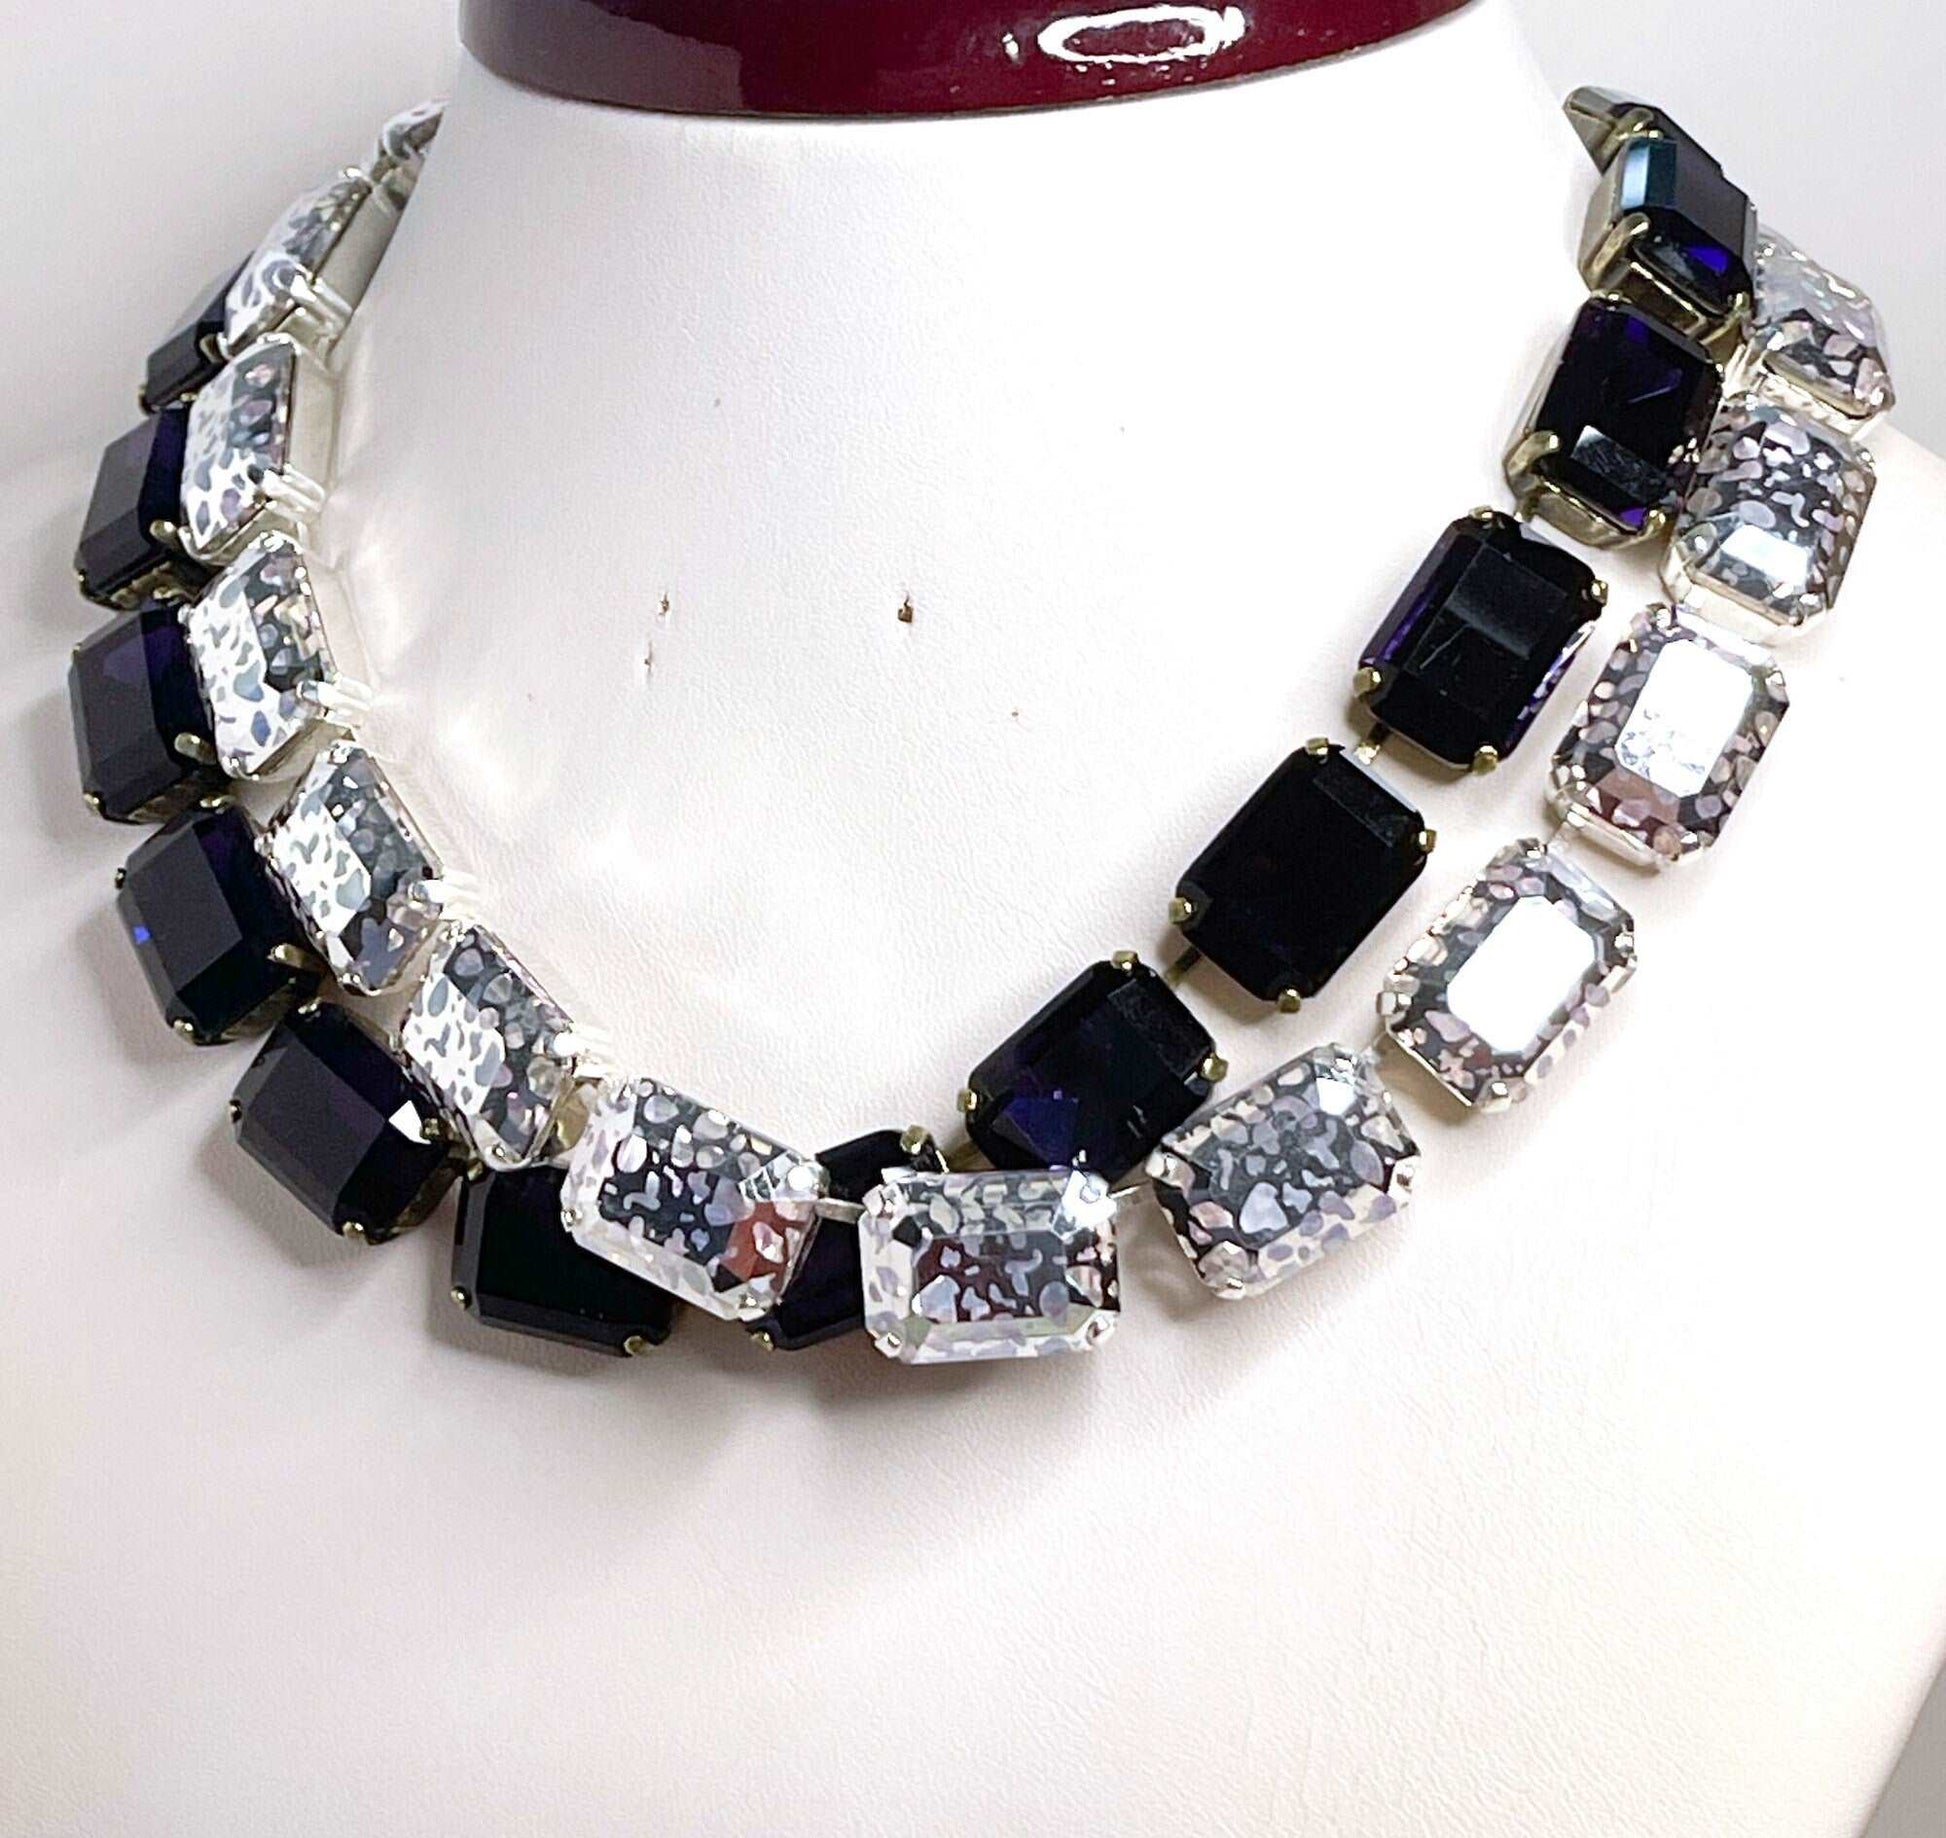 Dark Purple Georgian Collet, Silver Patina Crystal Choker, Anna Wintour Style, Amethyst Riviere Necklace, Statement Necklaces for Women